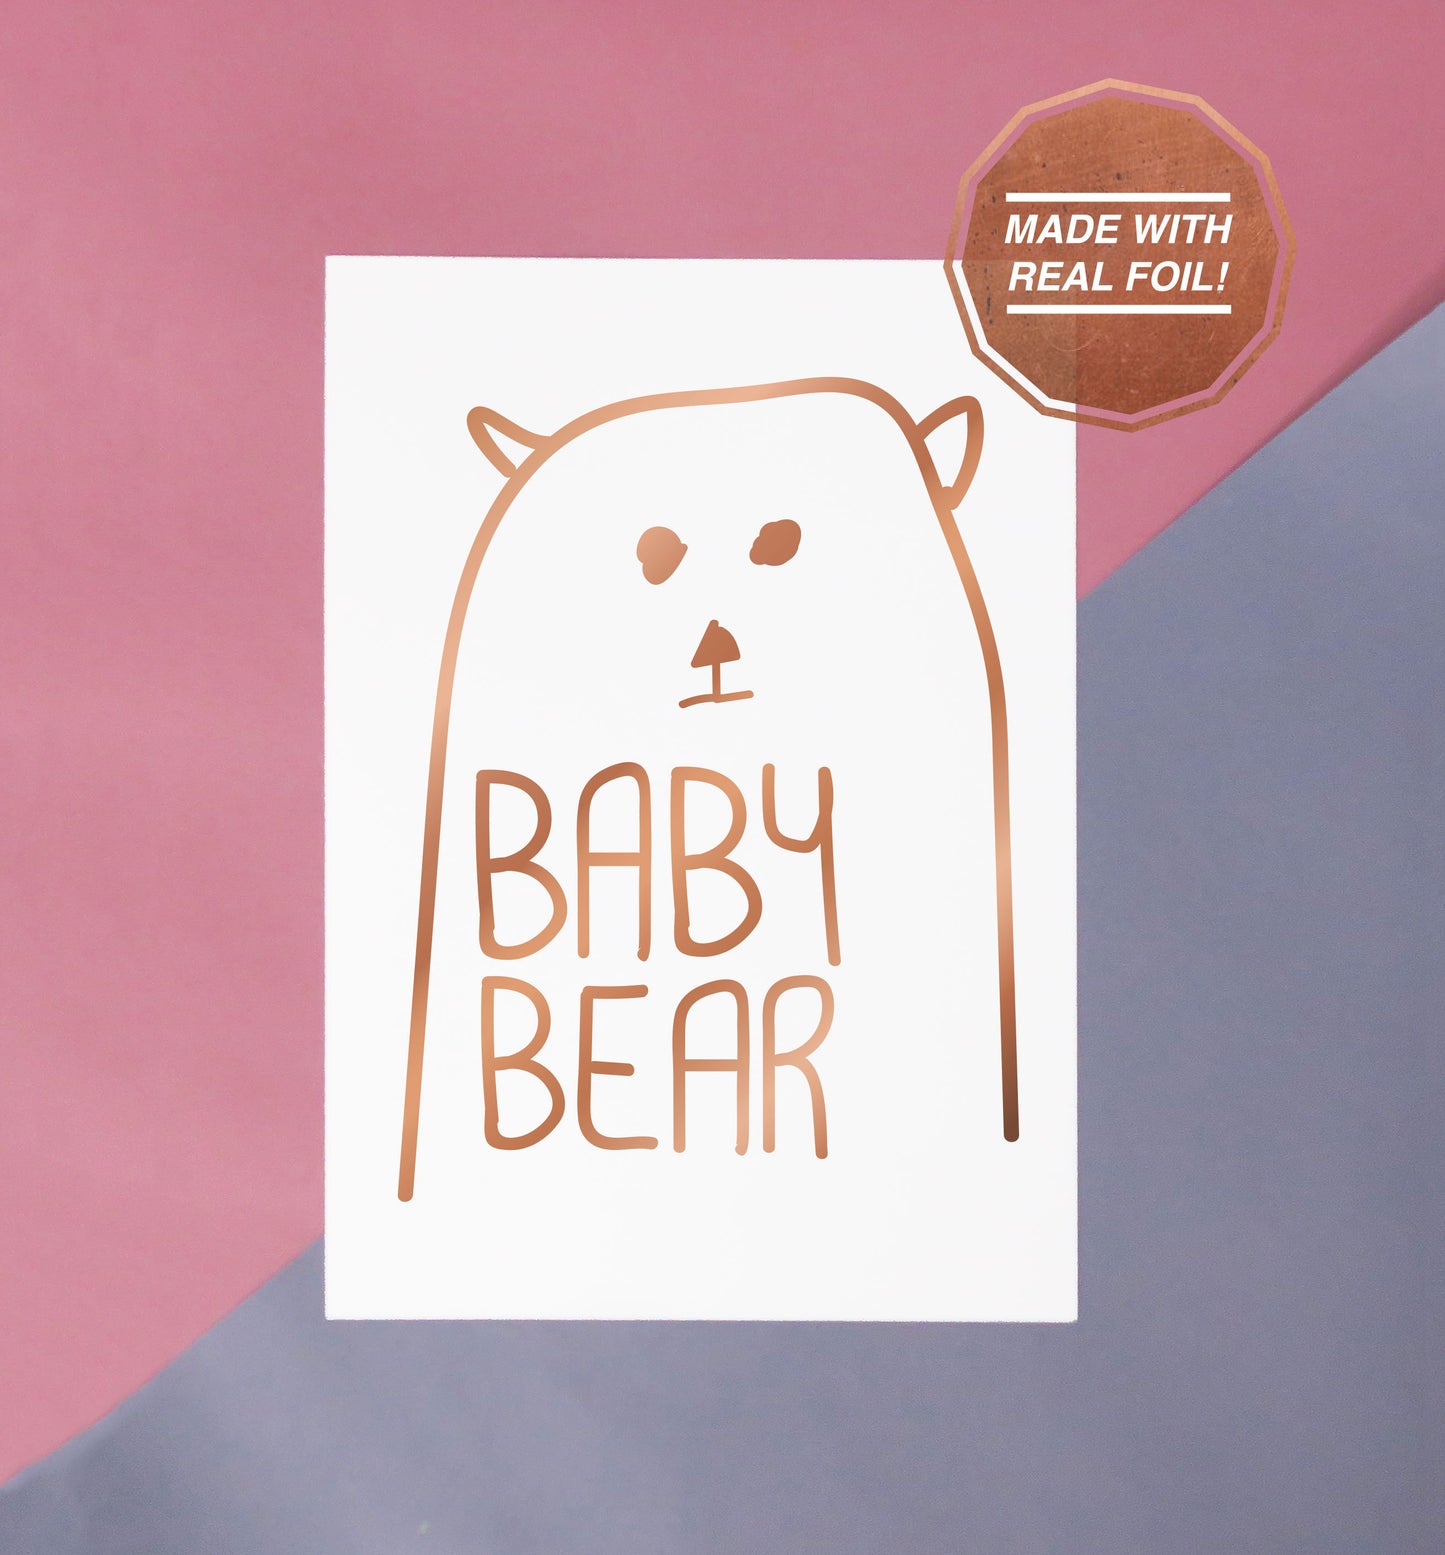 baby bear rose gold foiled print perfect for nurseries and playrooms cute matching family gift